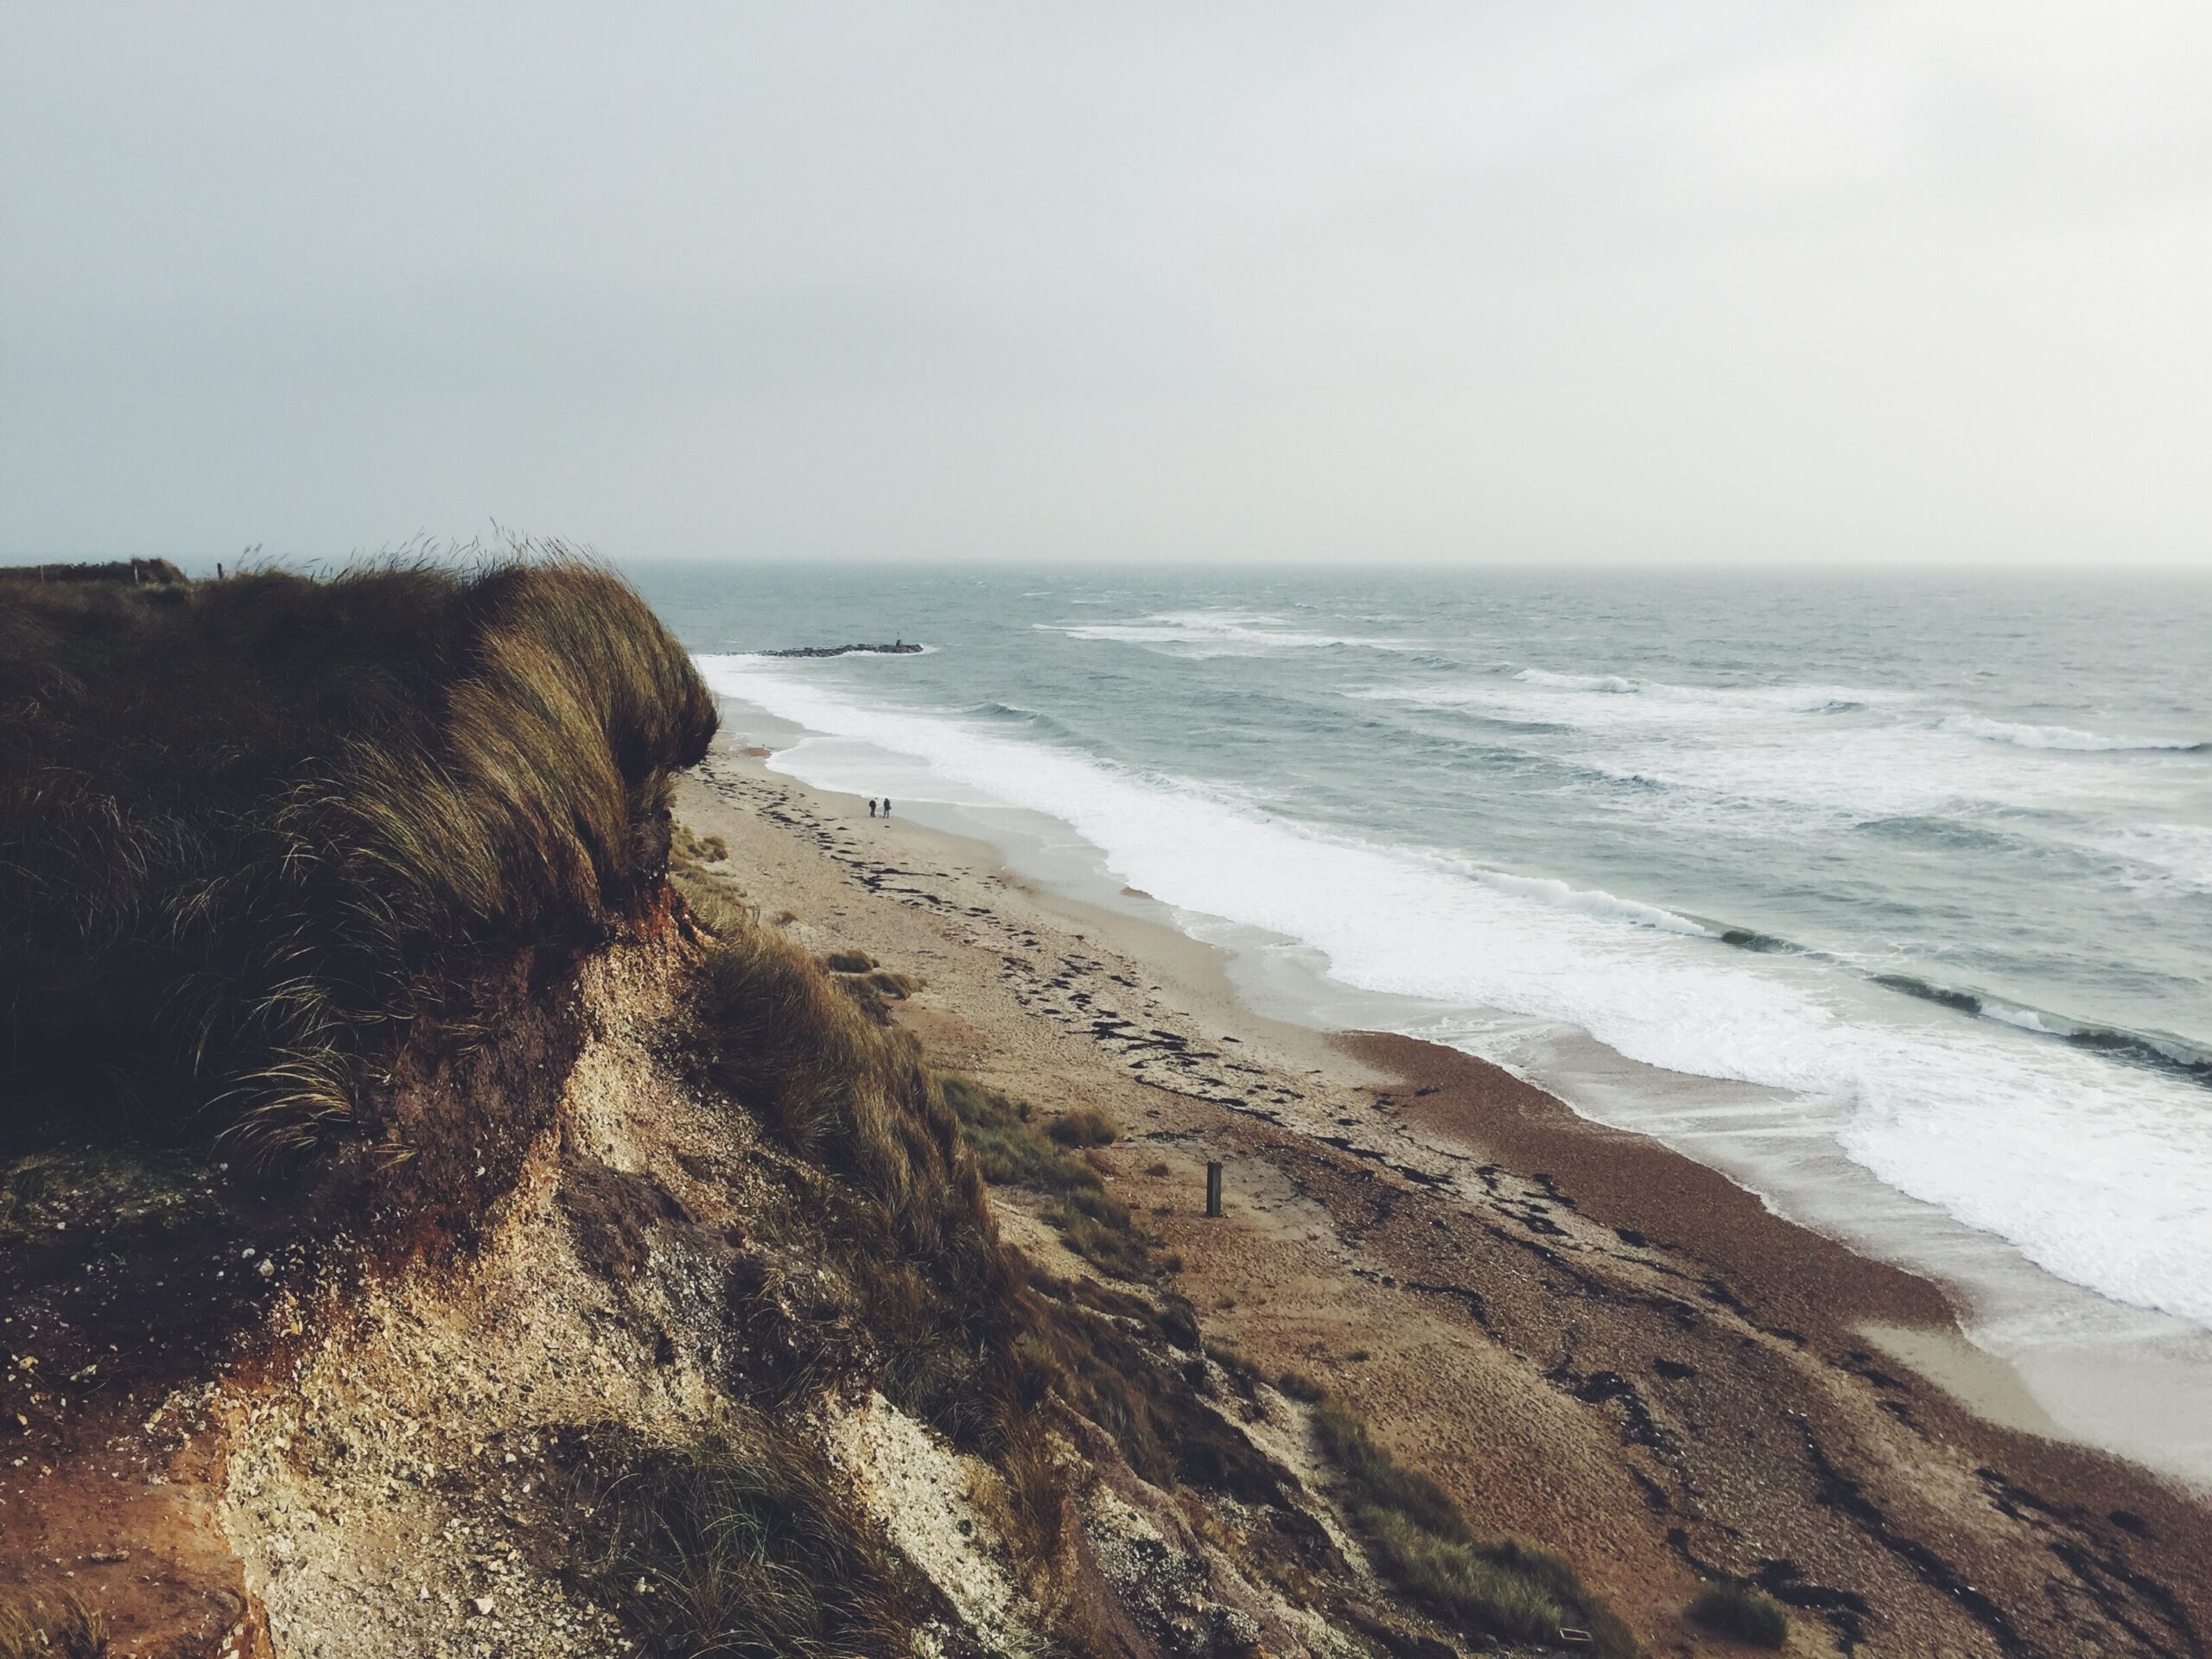 England Implements Full Protections For Some Areas Off-Coastline. Source: Unsplash